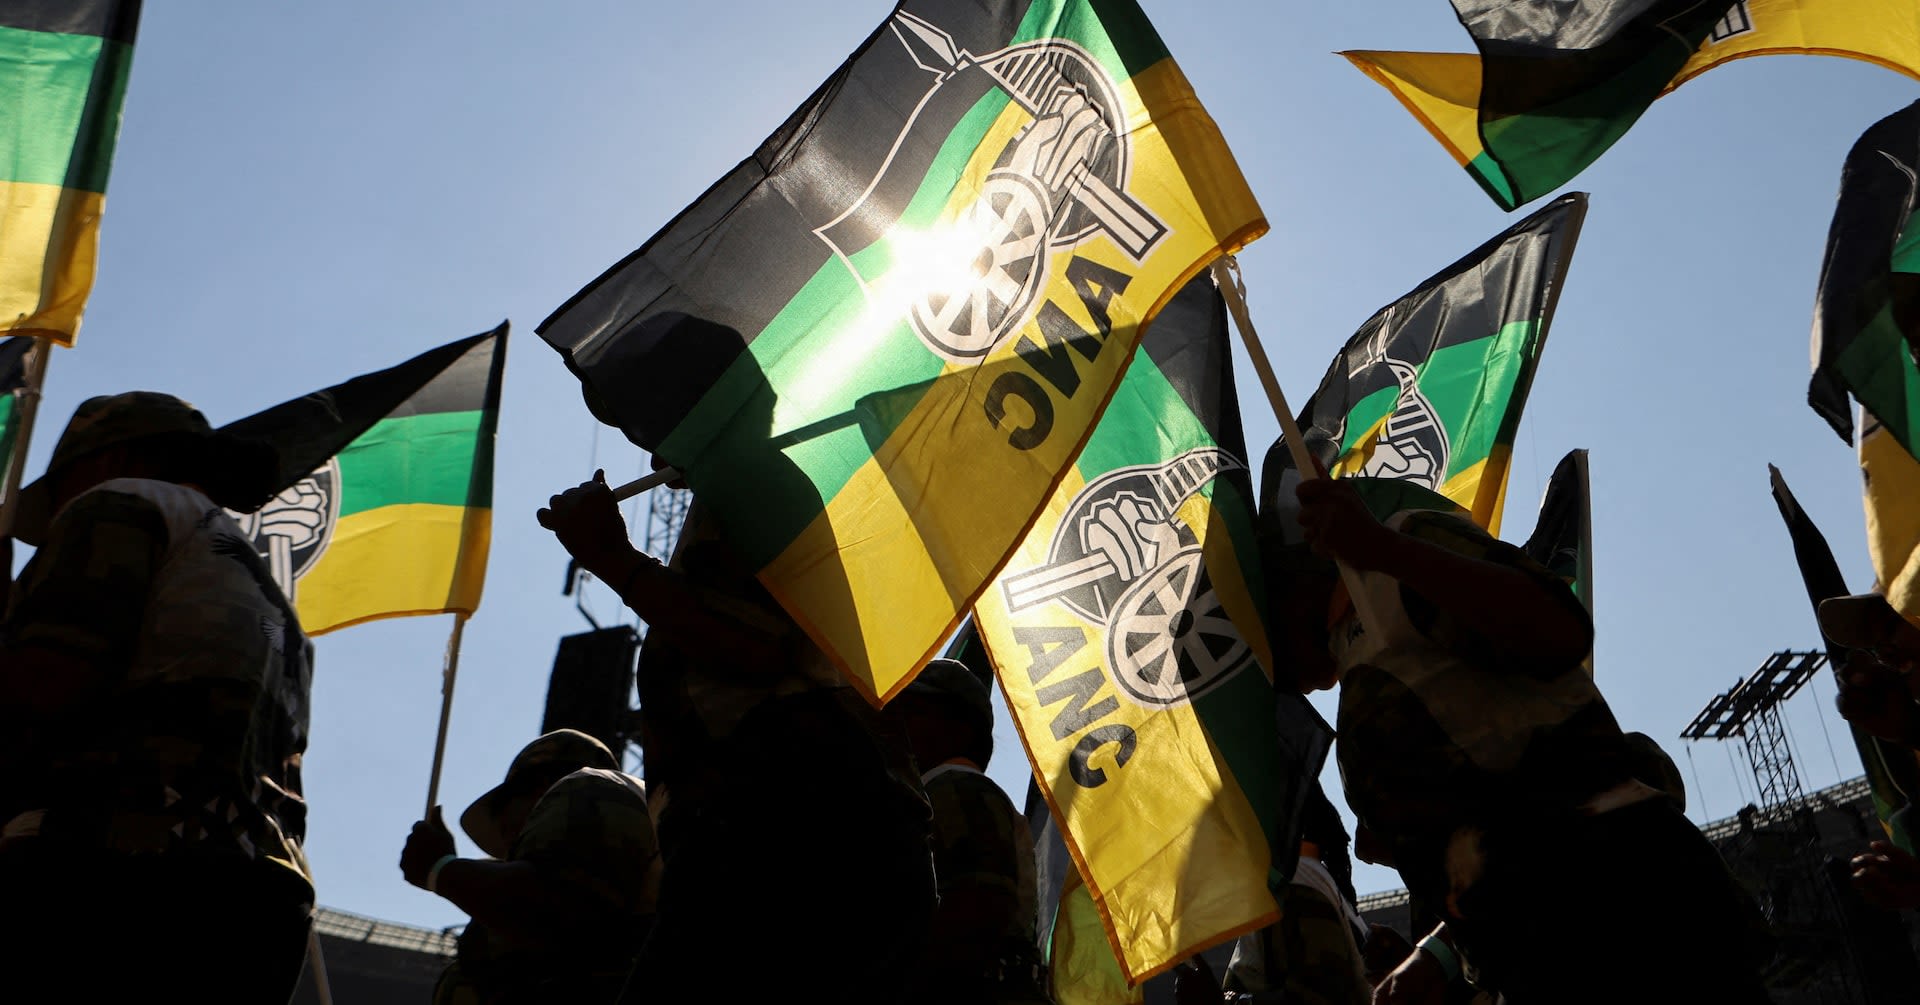 South Africa election: ANC could lose majority